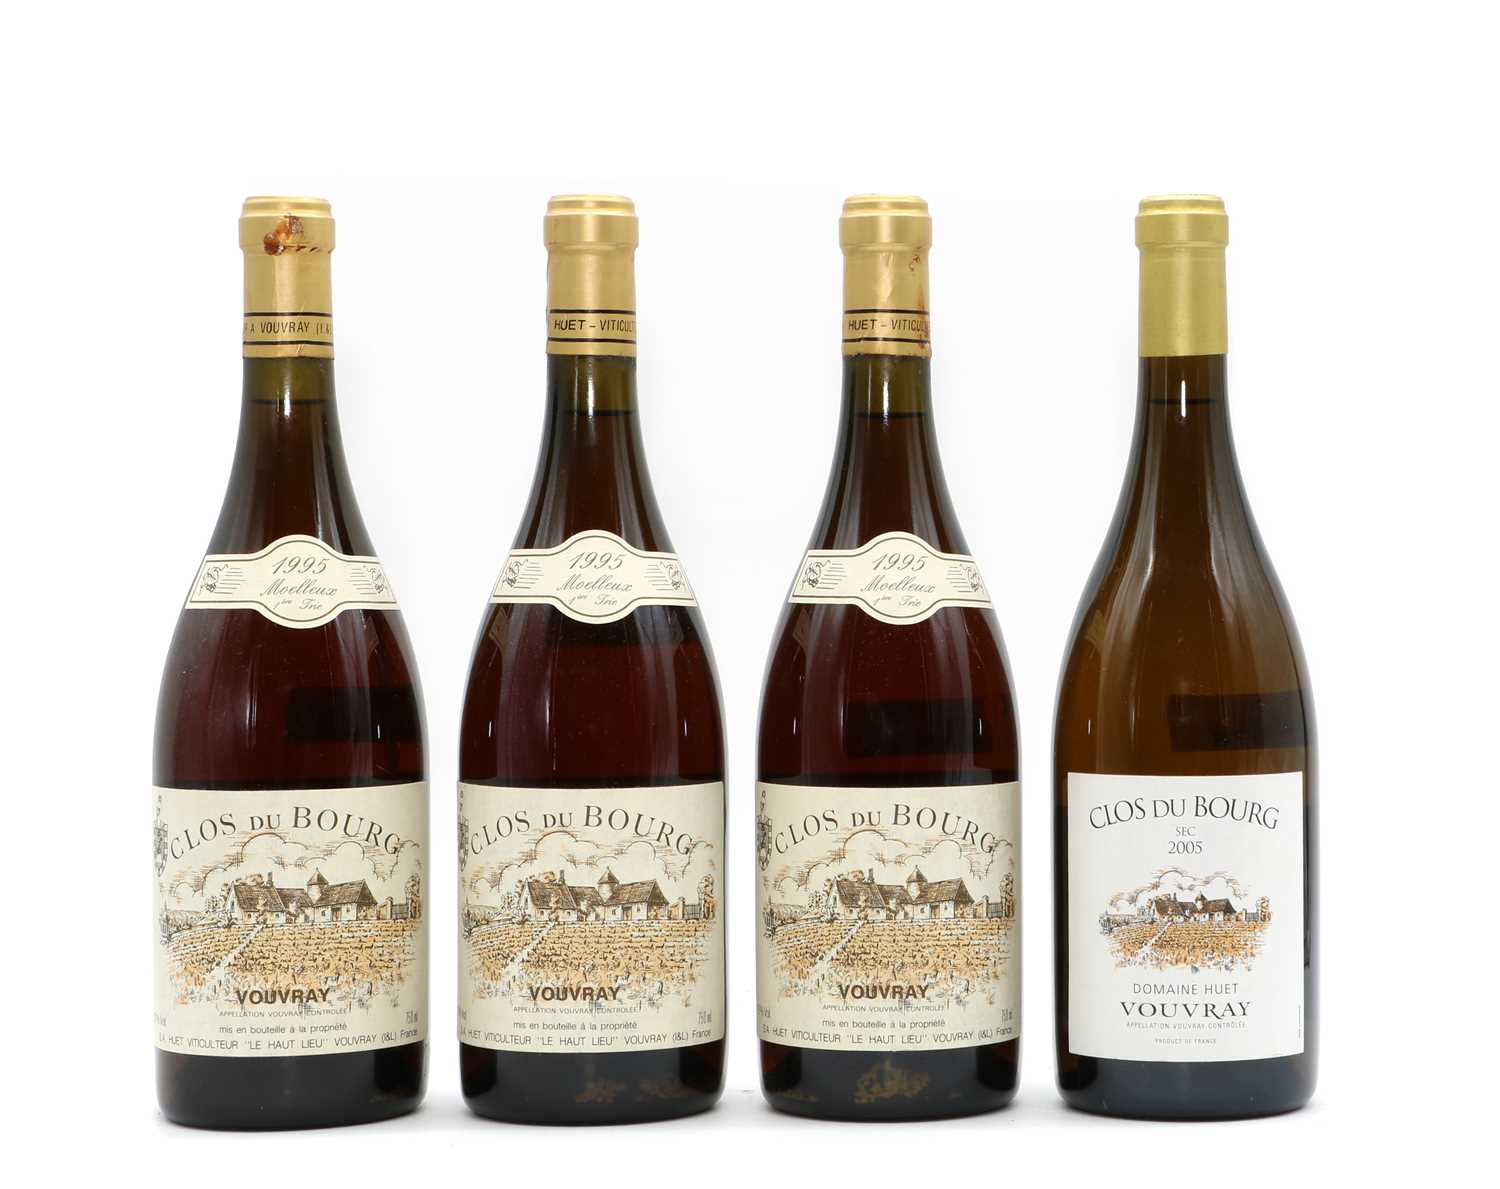 Lot 46 - Vouvray, Moelleux, Clos du Bourg, 1995 and one other, four bottles in total